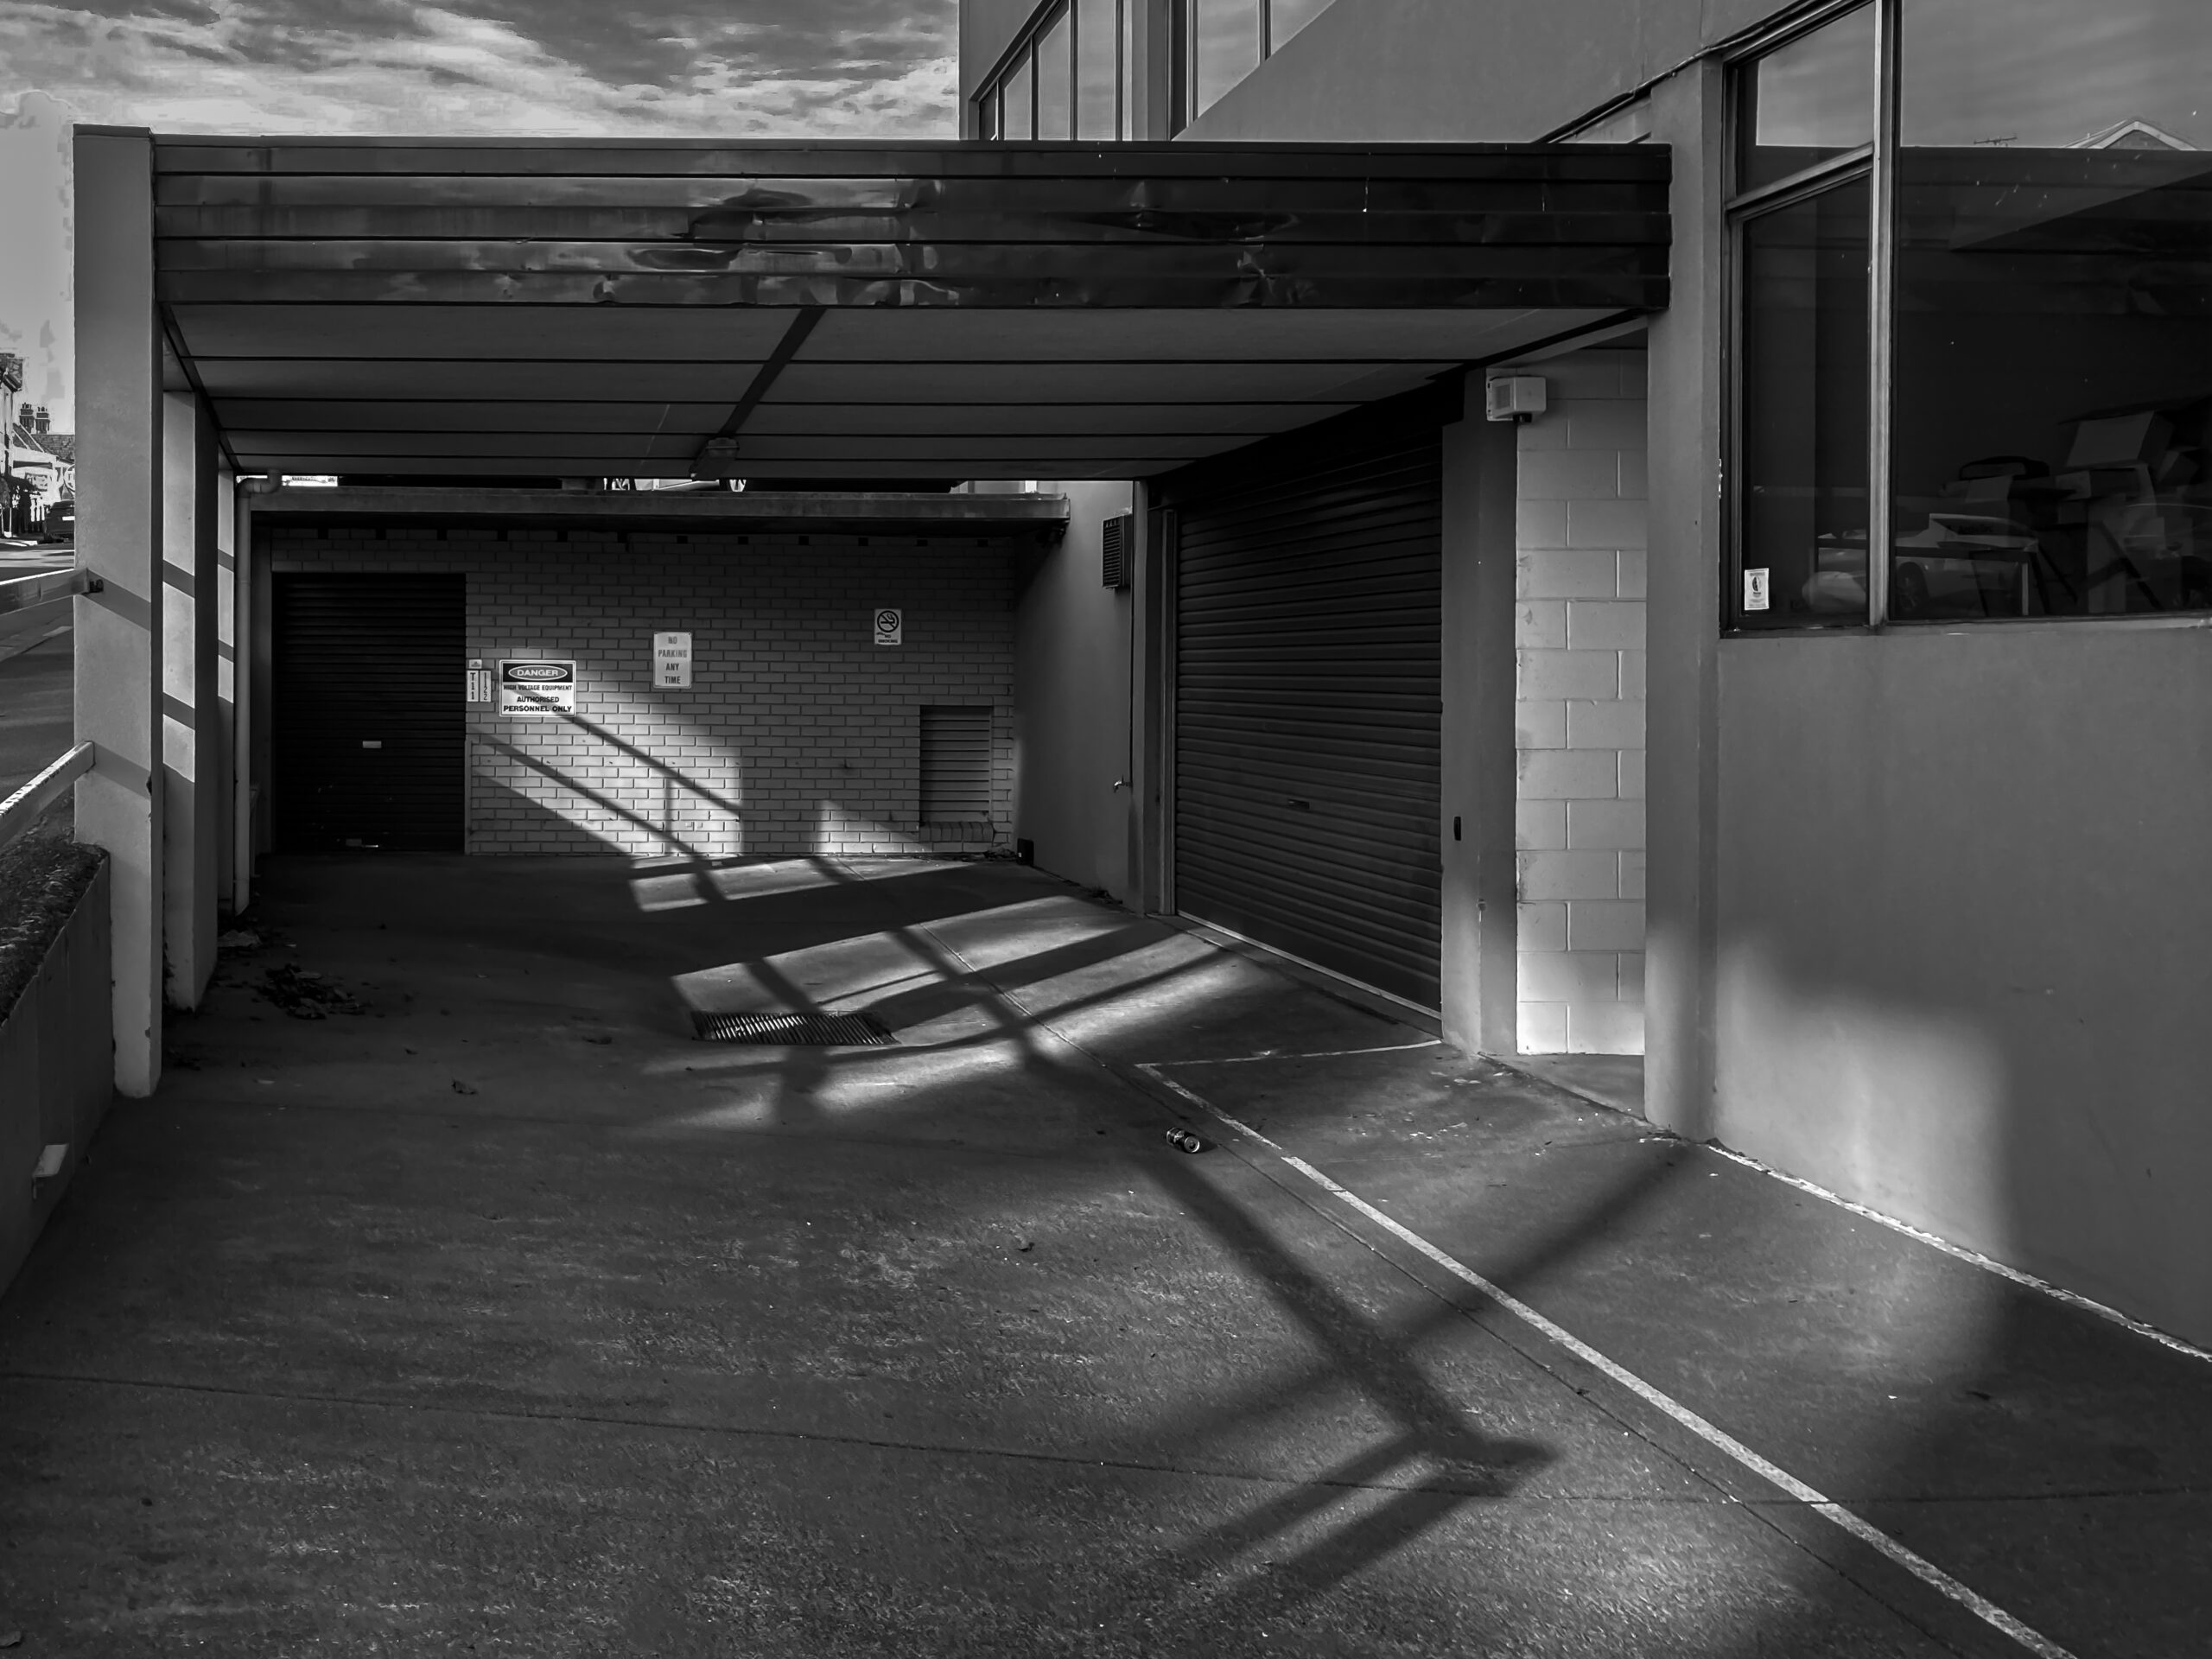 A black & white image of light streaming into a darkened parking garage